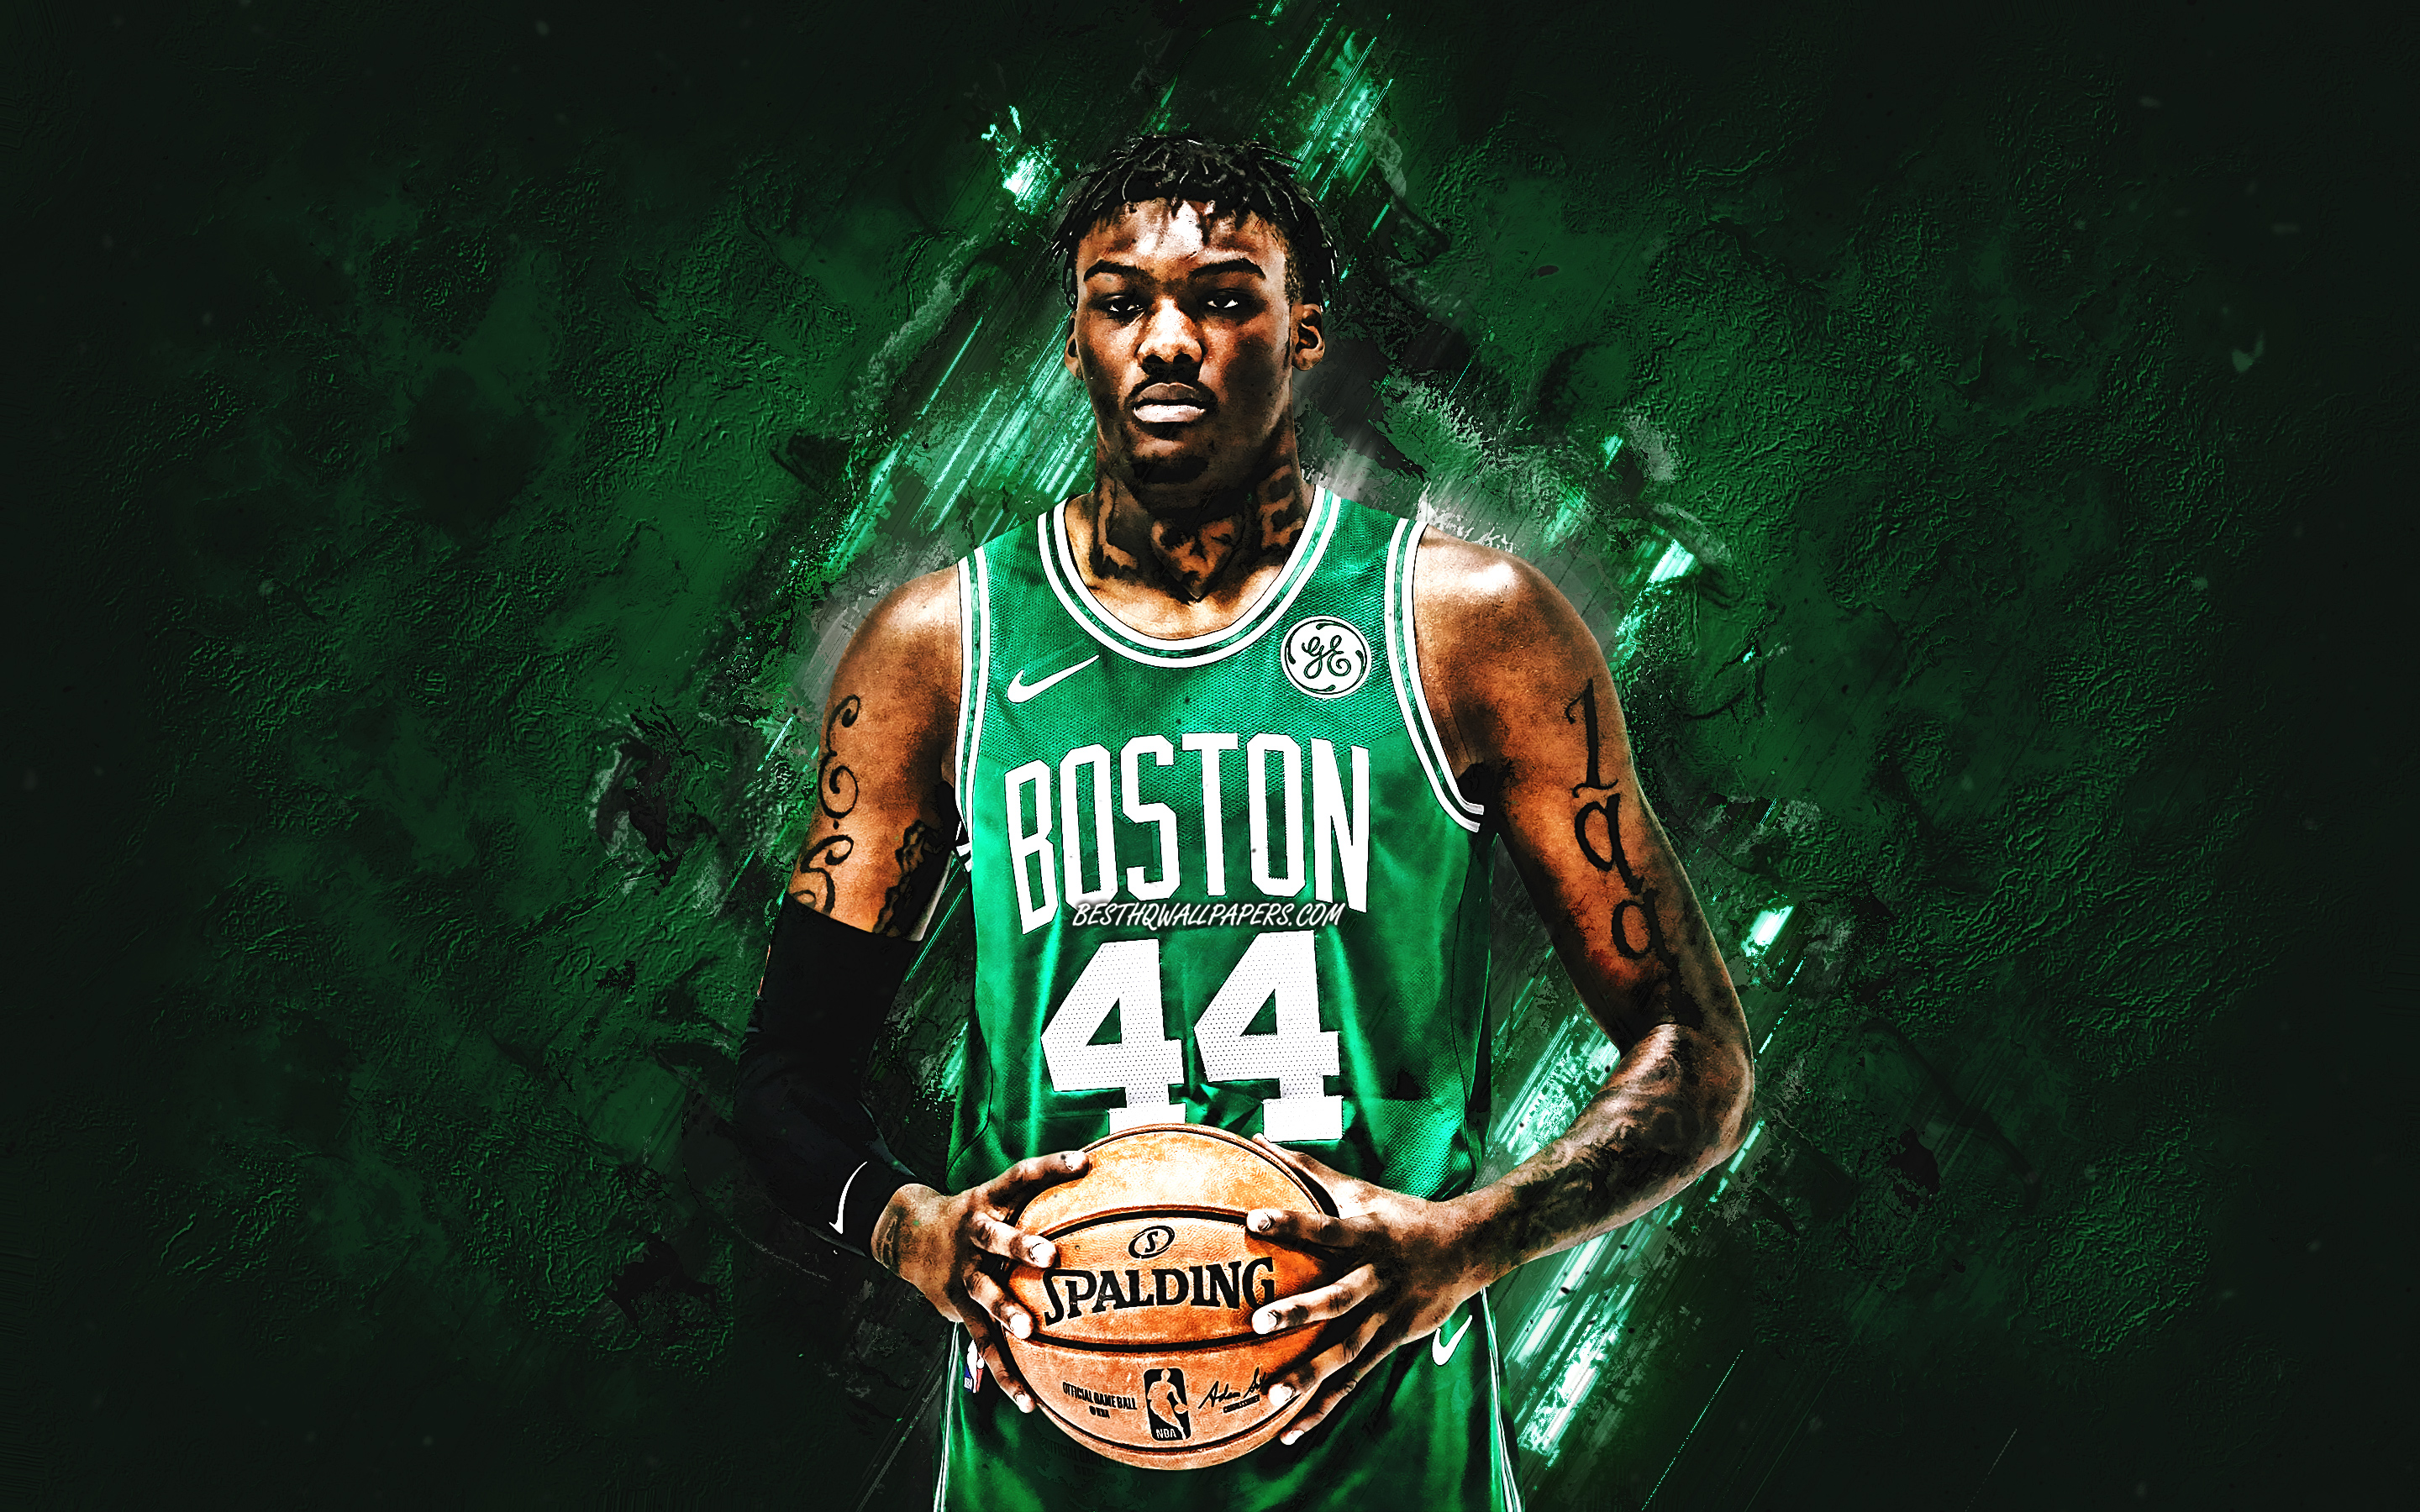 Download wallpaper Robert Williams, NBA, Boston Celtics, green stone background, American Basketball Player, portrait, USA, basketball, Boston Celtics players for desktop with resolution 2880x1800. High Quality HD picture wallpaper